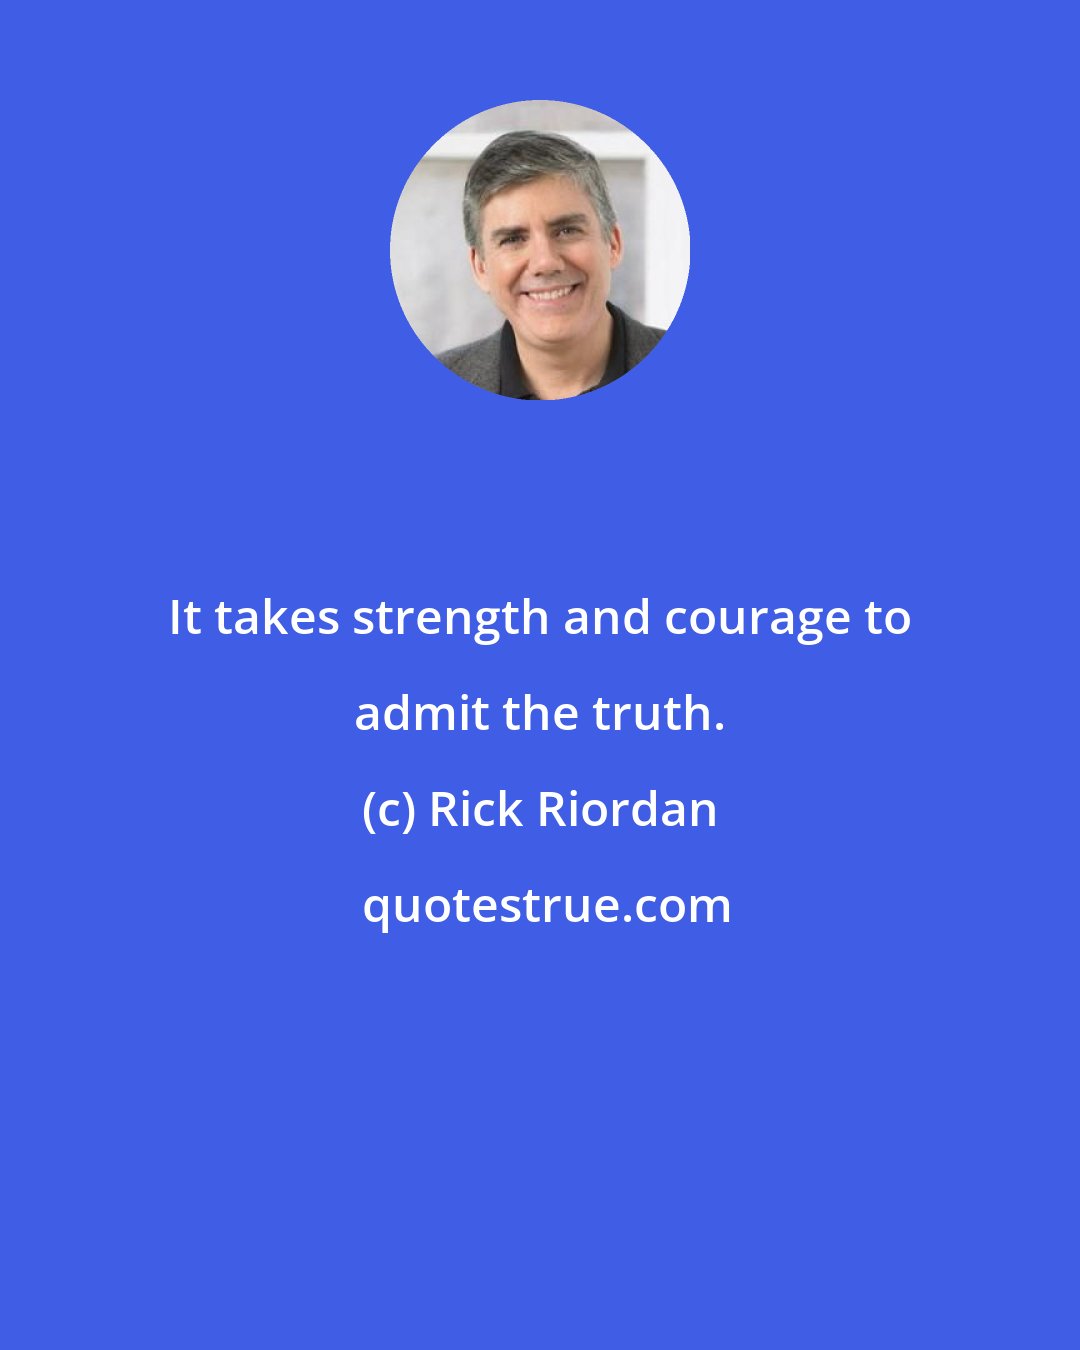 Rick Riordan: It takes strength and courage to admit the truth.